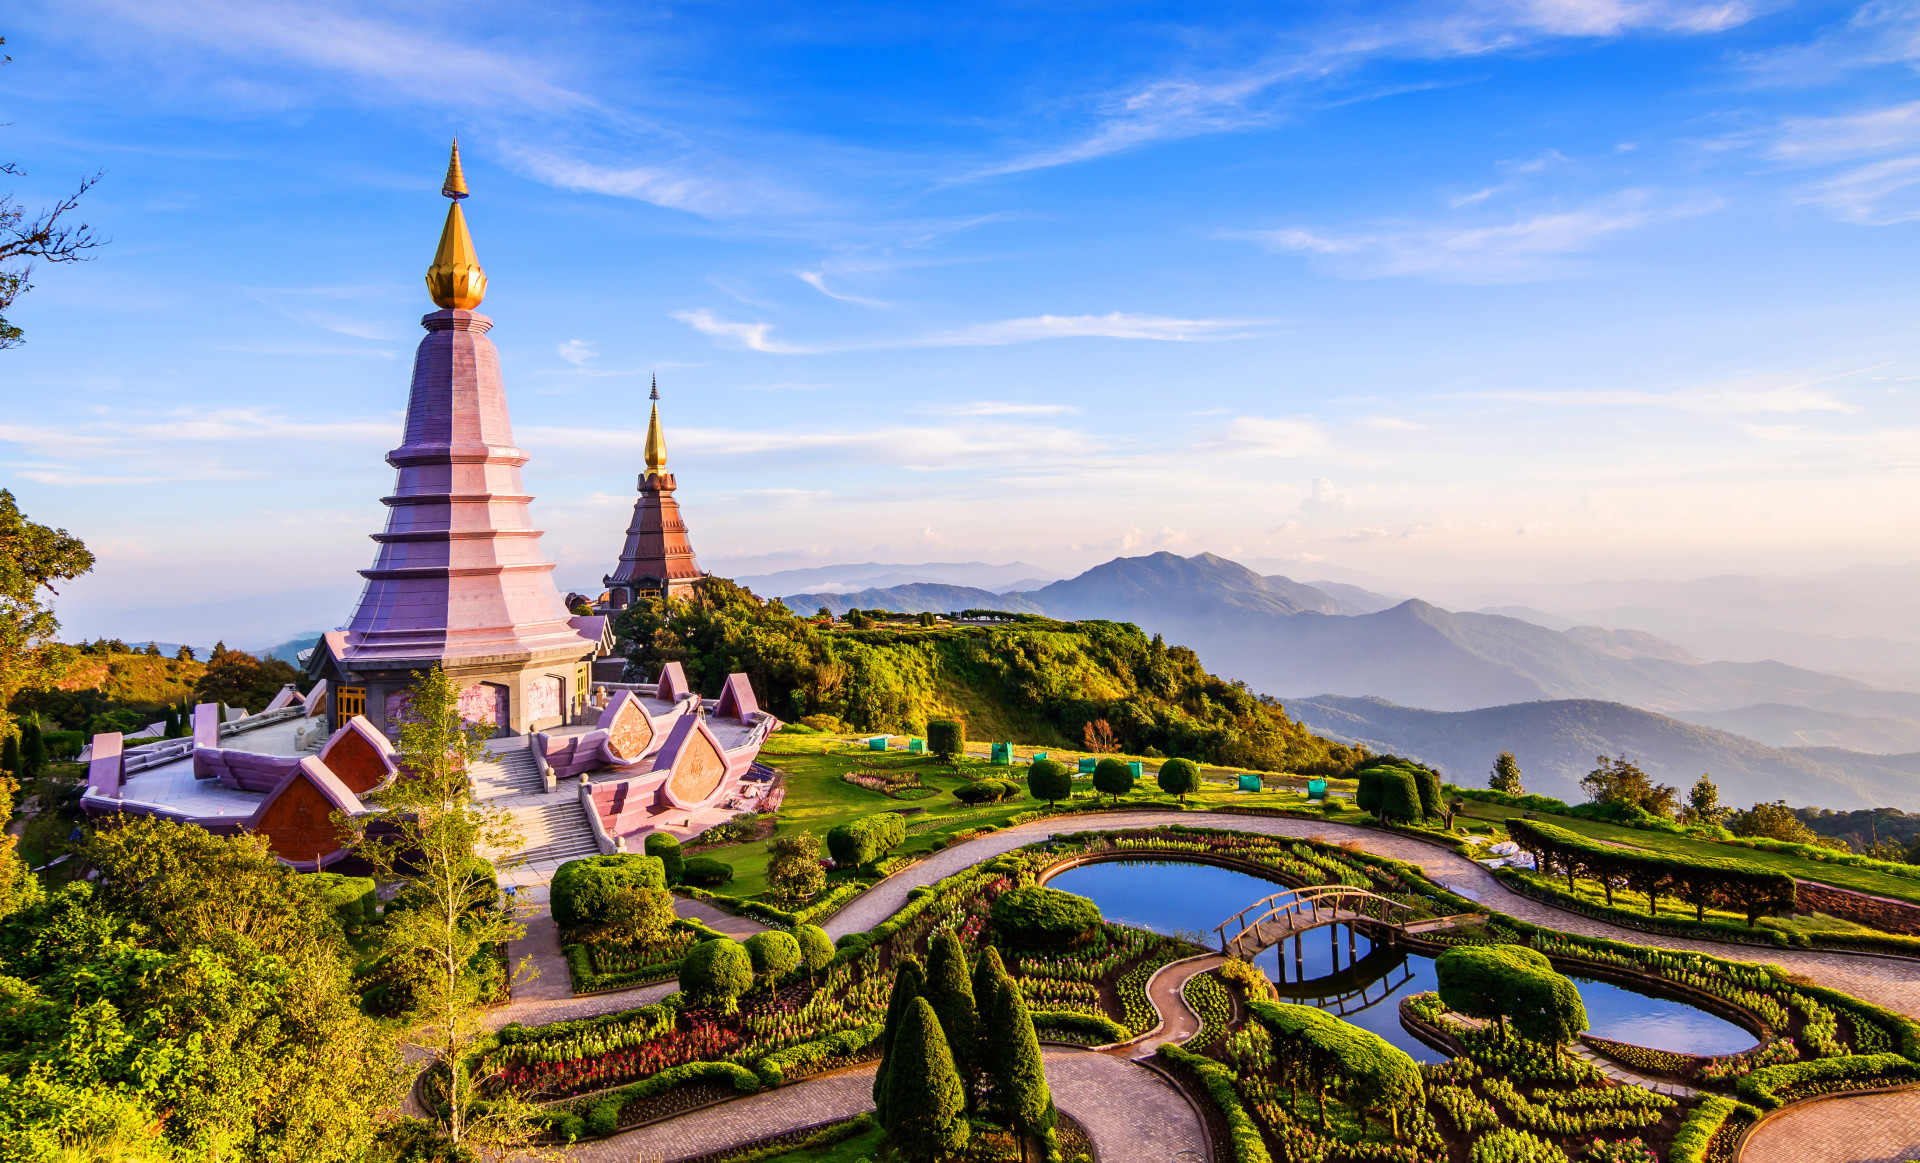 This Thai city is perfect to explore on foot and is very popular among visitors. <p><a href="https://www.msn.com/en-sg/community/channel/vid-7xx8mnucu55yw63we9va2gwr7uihbxwc68fxqp25x6tg4ftibpra?cvid=94631541bc0f4f89bfd59158d696ad7e">Follow us and access great exclusive content every day</a></p>